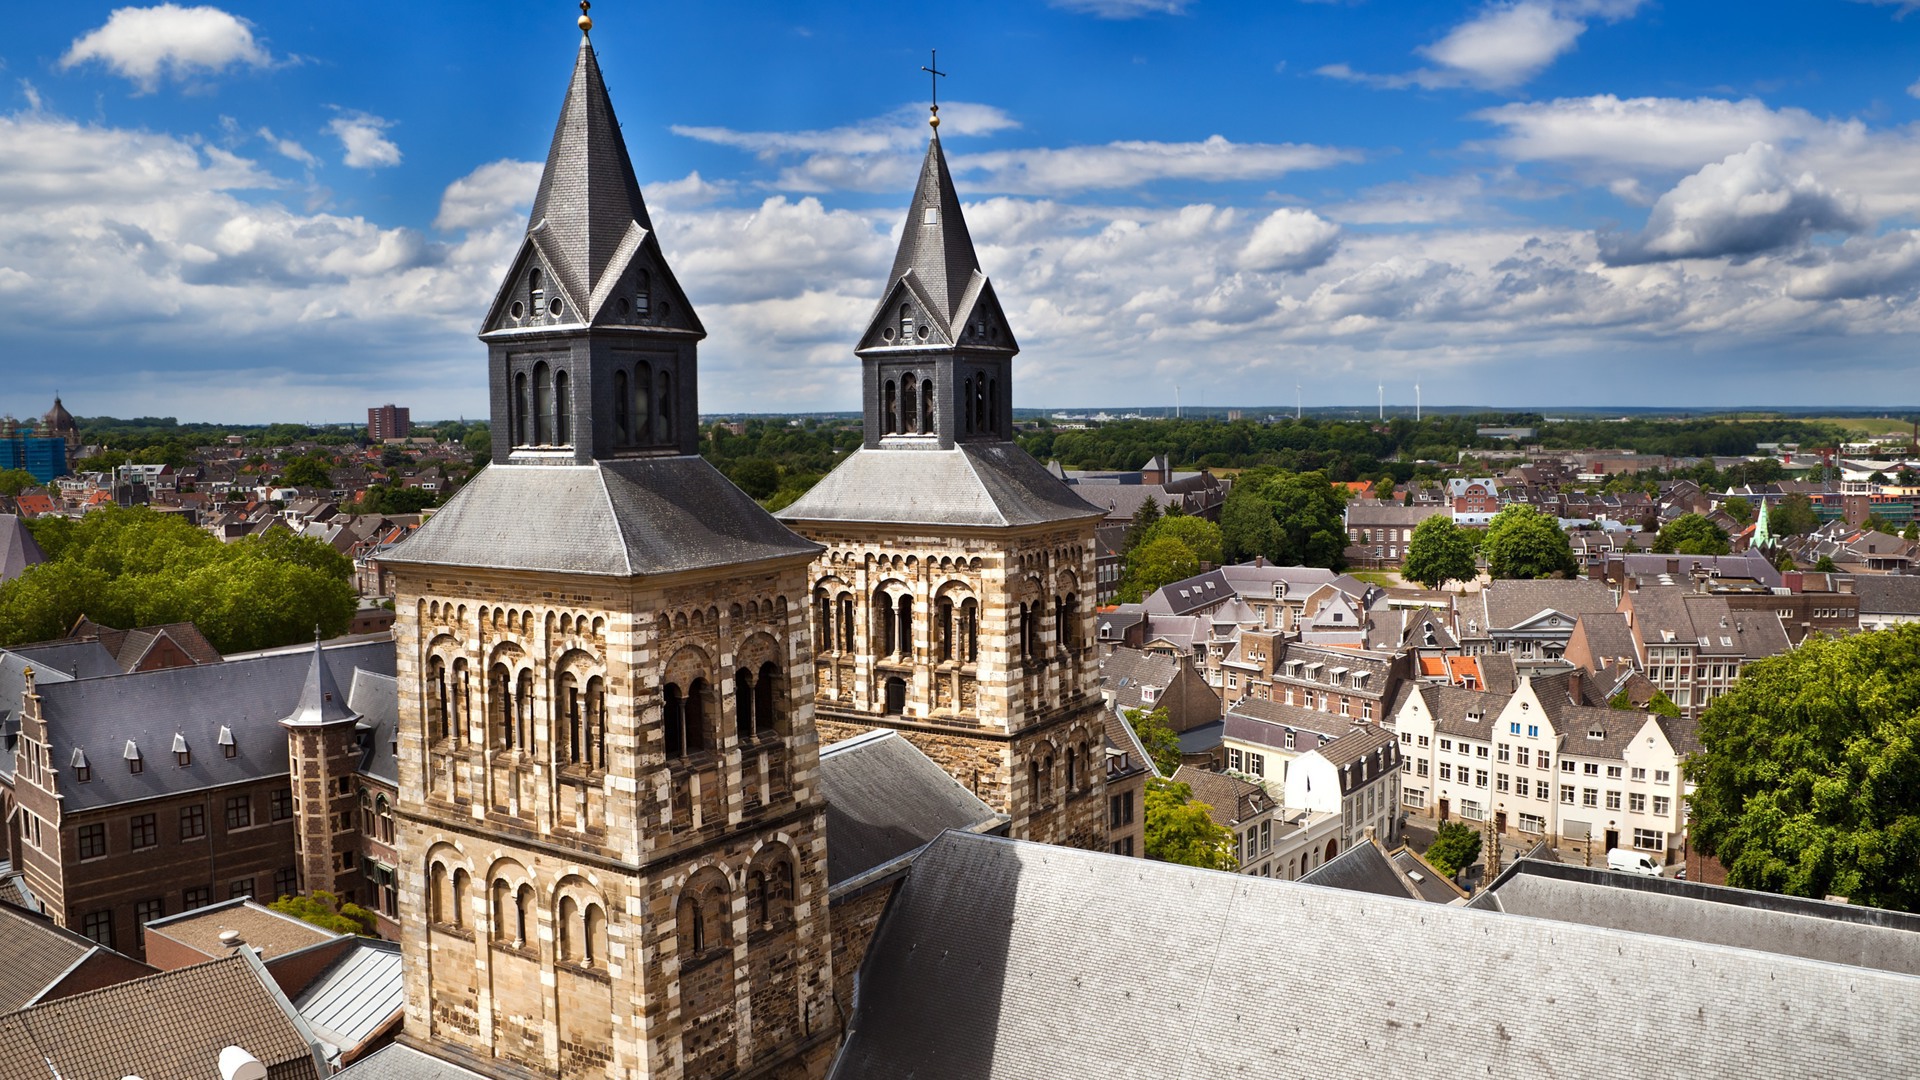 Explore the rich history of Maastricht during your stay in South Limburg